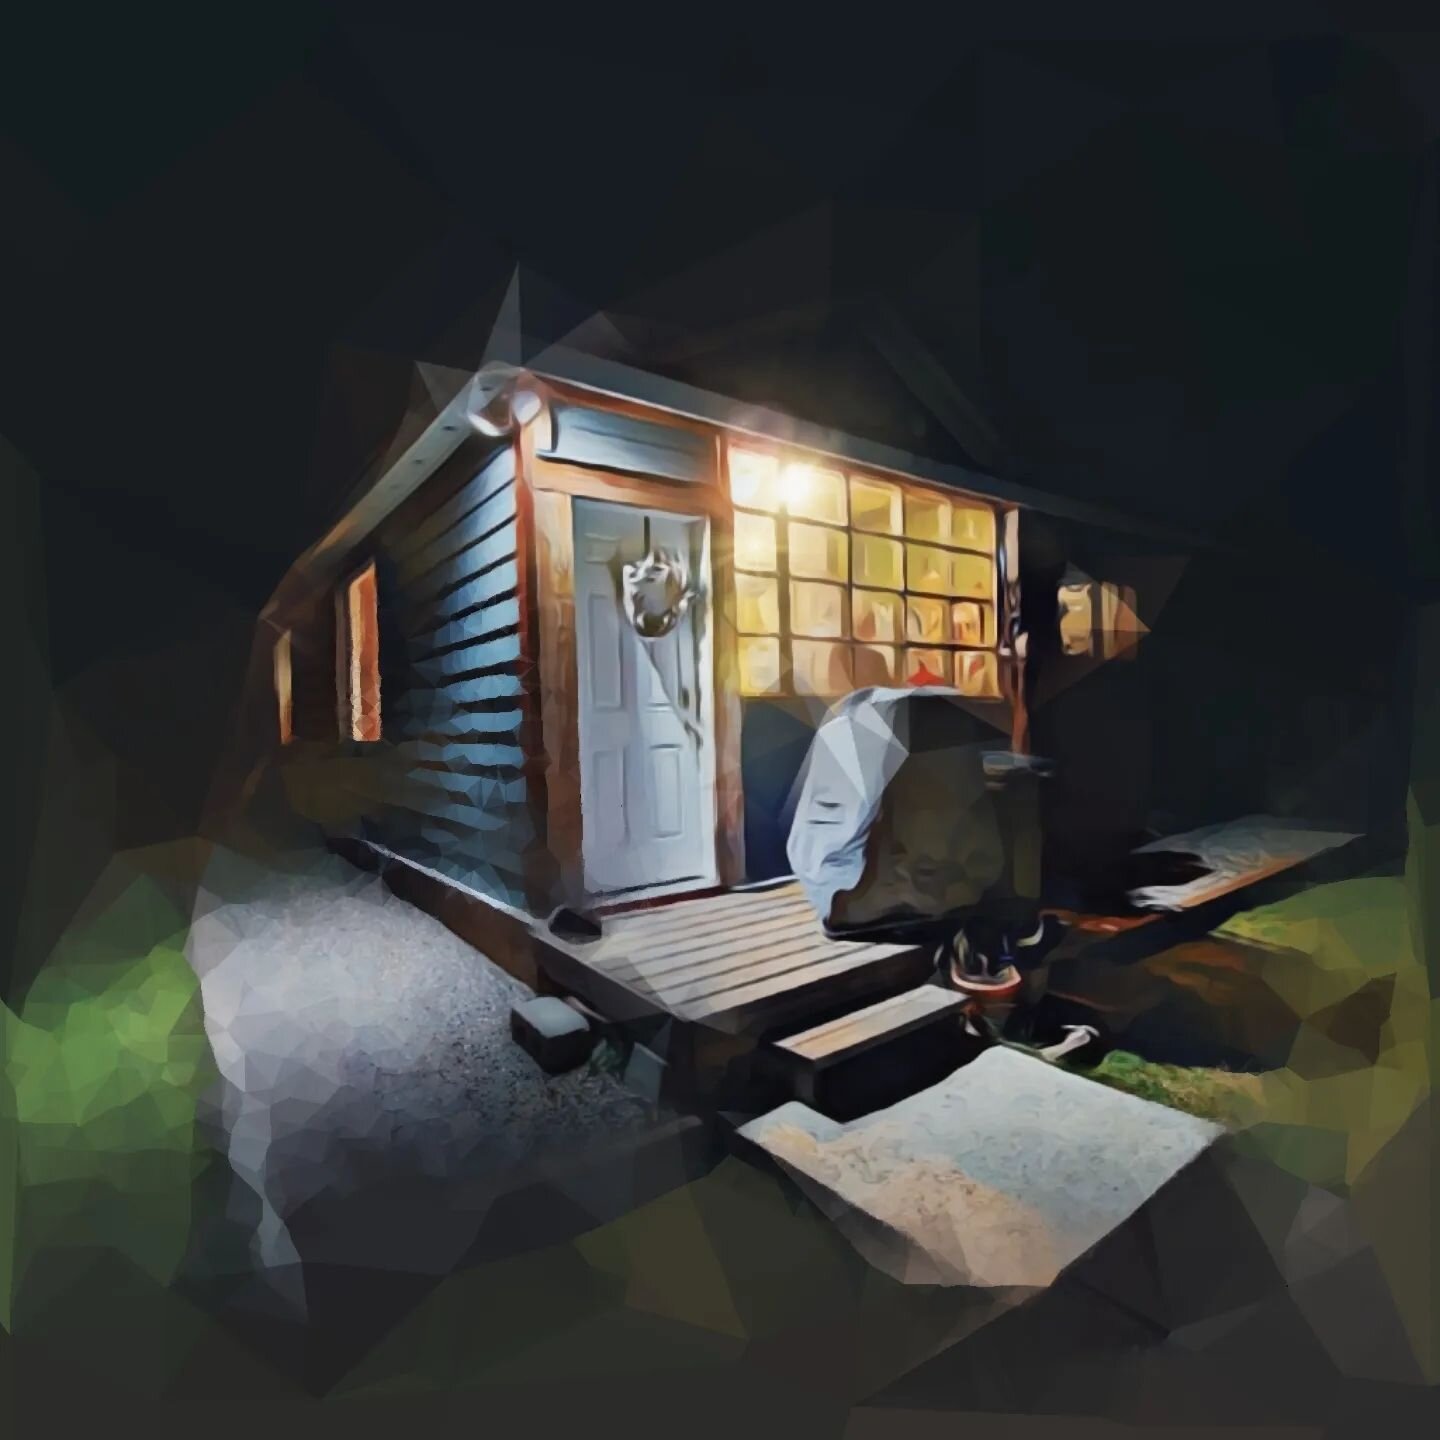 &quot;Night Shift&quot; Digital painting. I think I would like to turn this one into an acrylic painting. love this idea for capturing a unique perspective of your home. Let me know if you want one inspired by your home at night!. #art #canadianartis